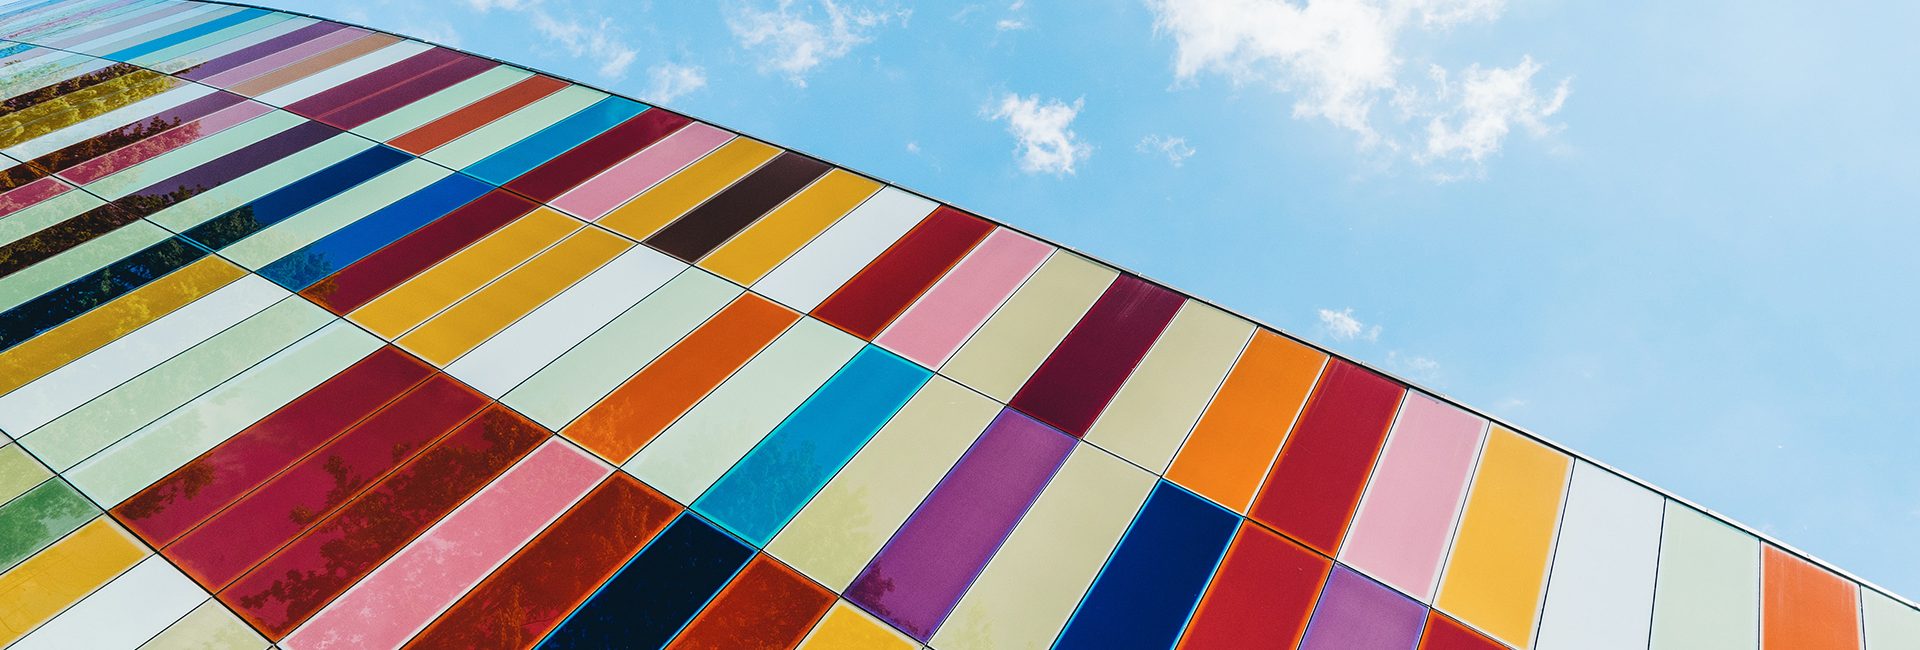 colorful-rectangles-building-against-blue-sky